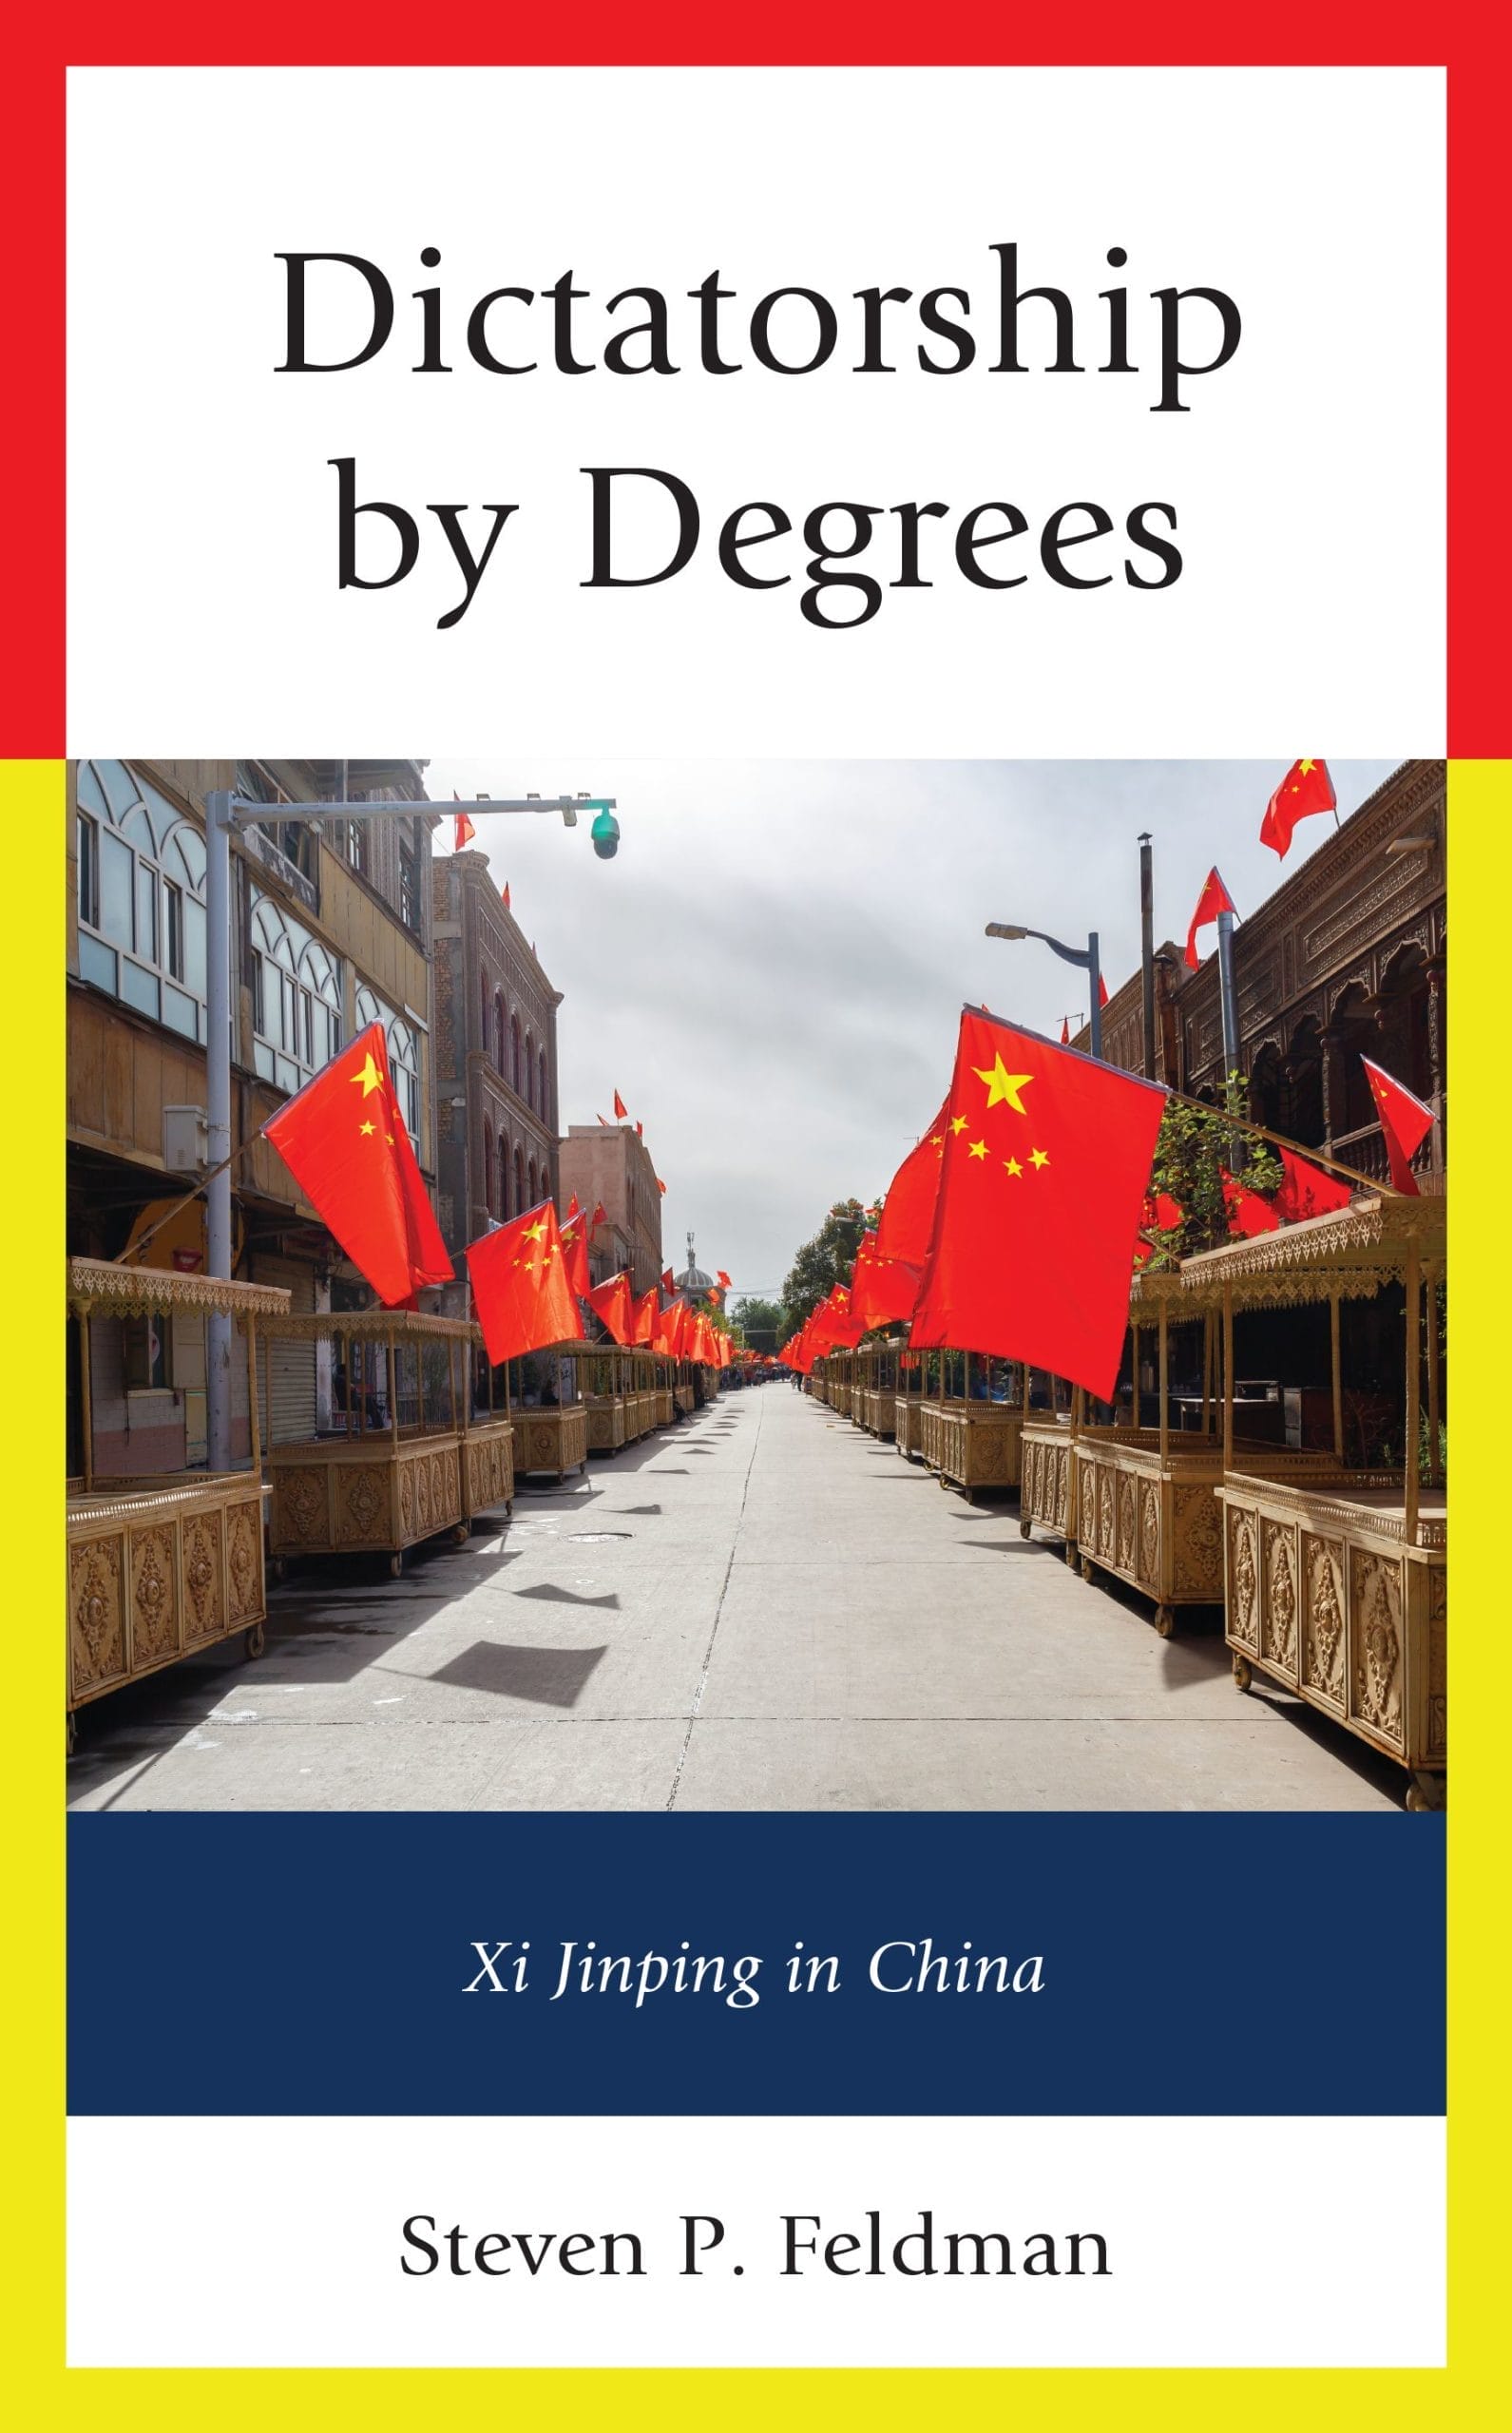 Book titled Dictatorship by Degrees